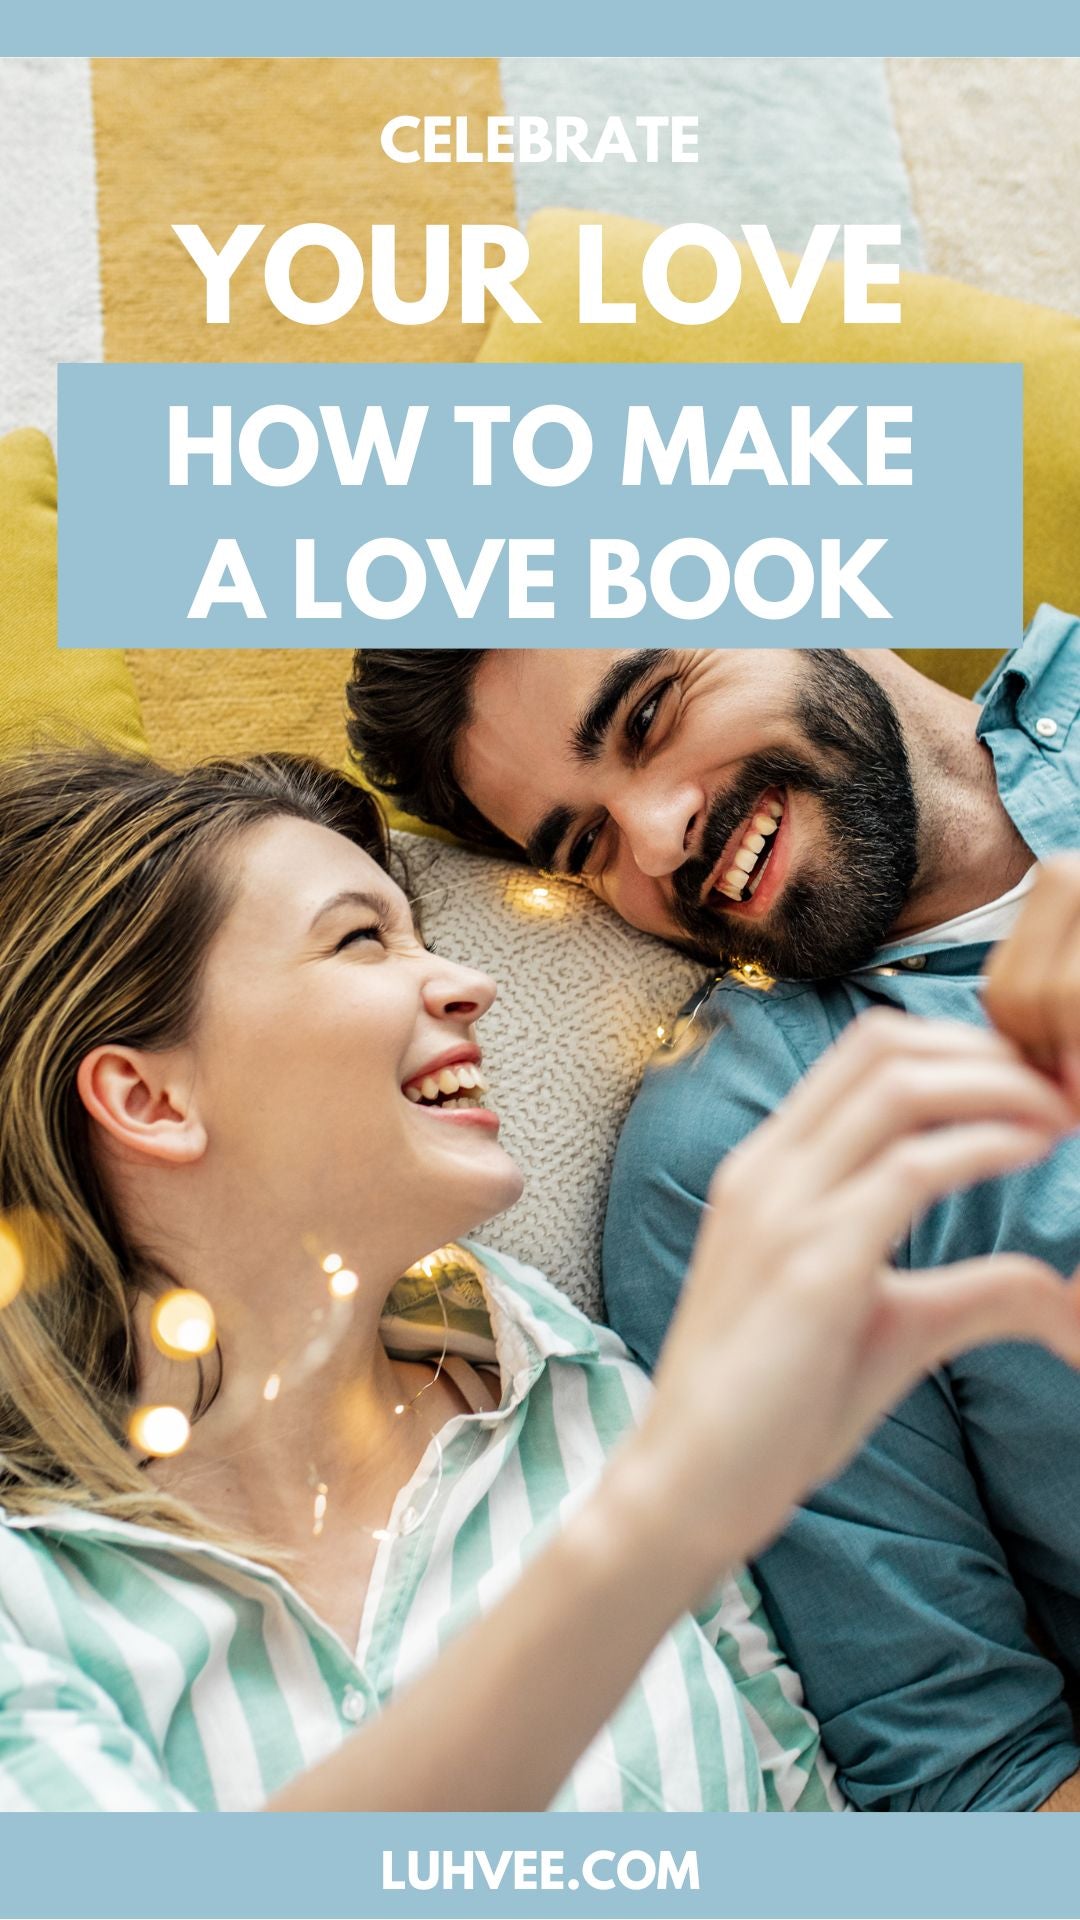 How to Celebrate Your Love By The Book